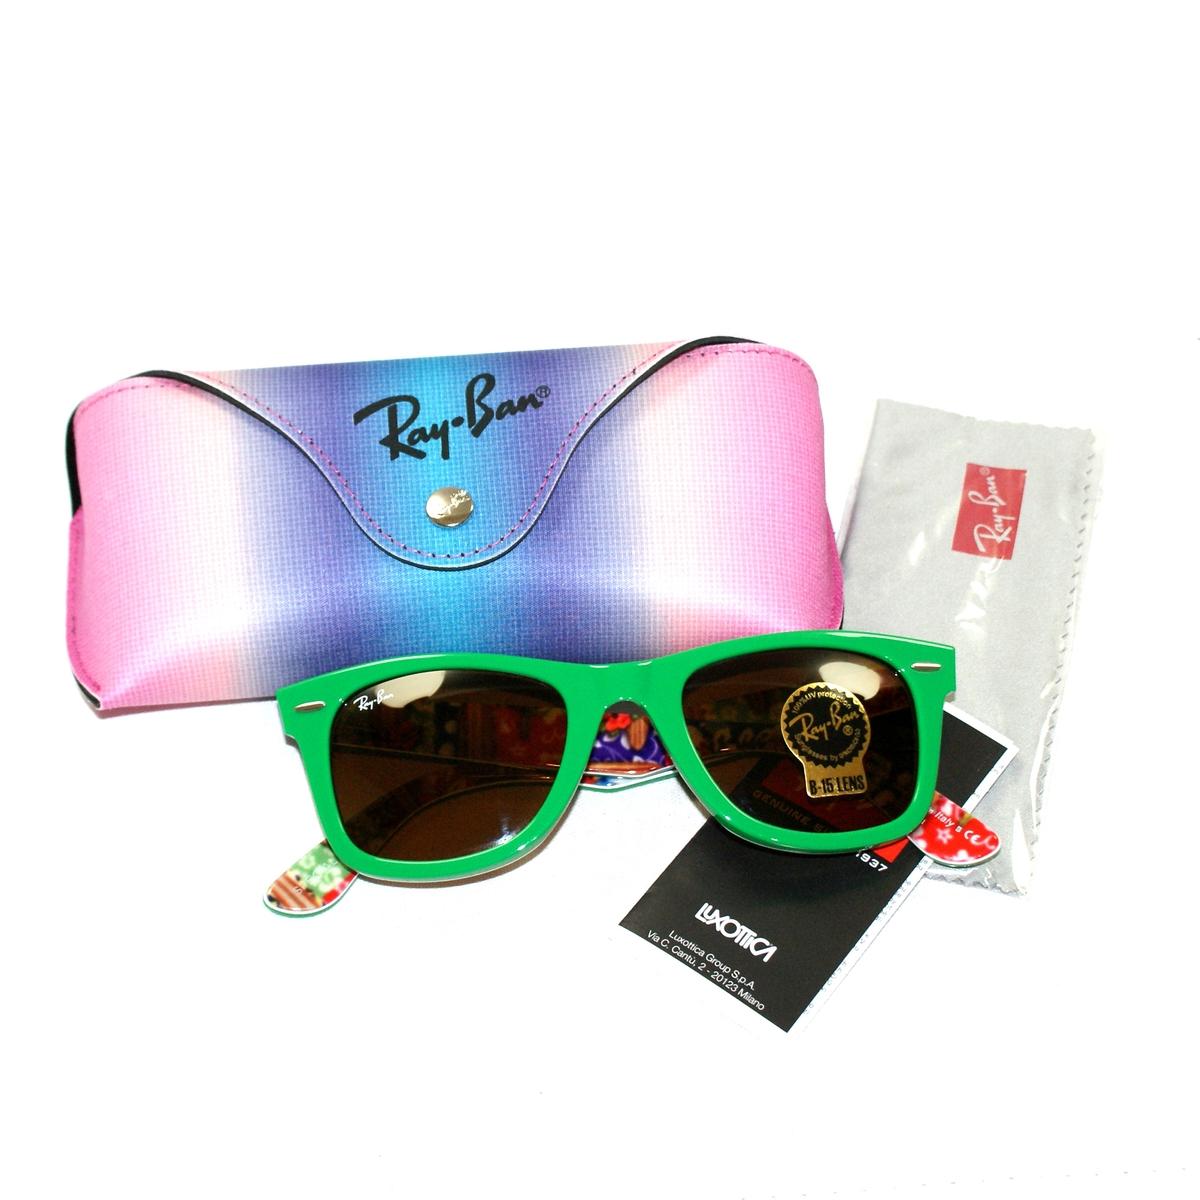 ray ban special series 11